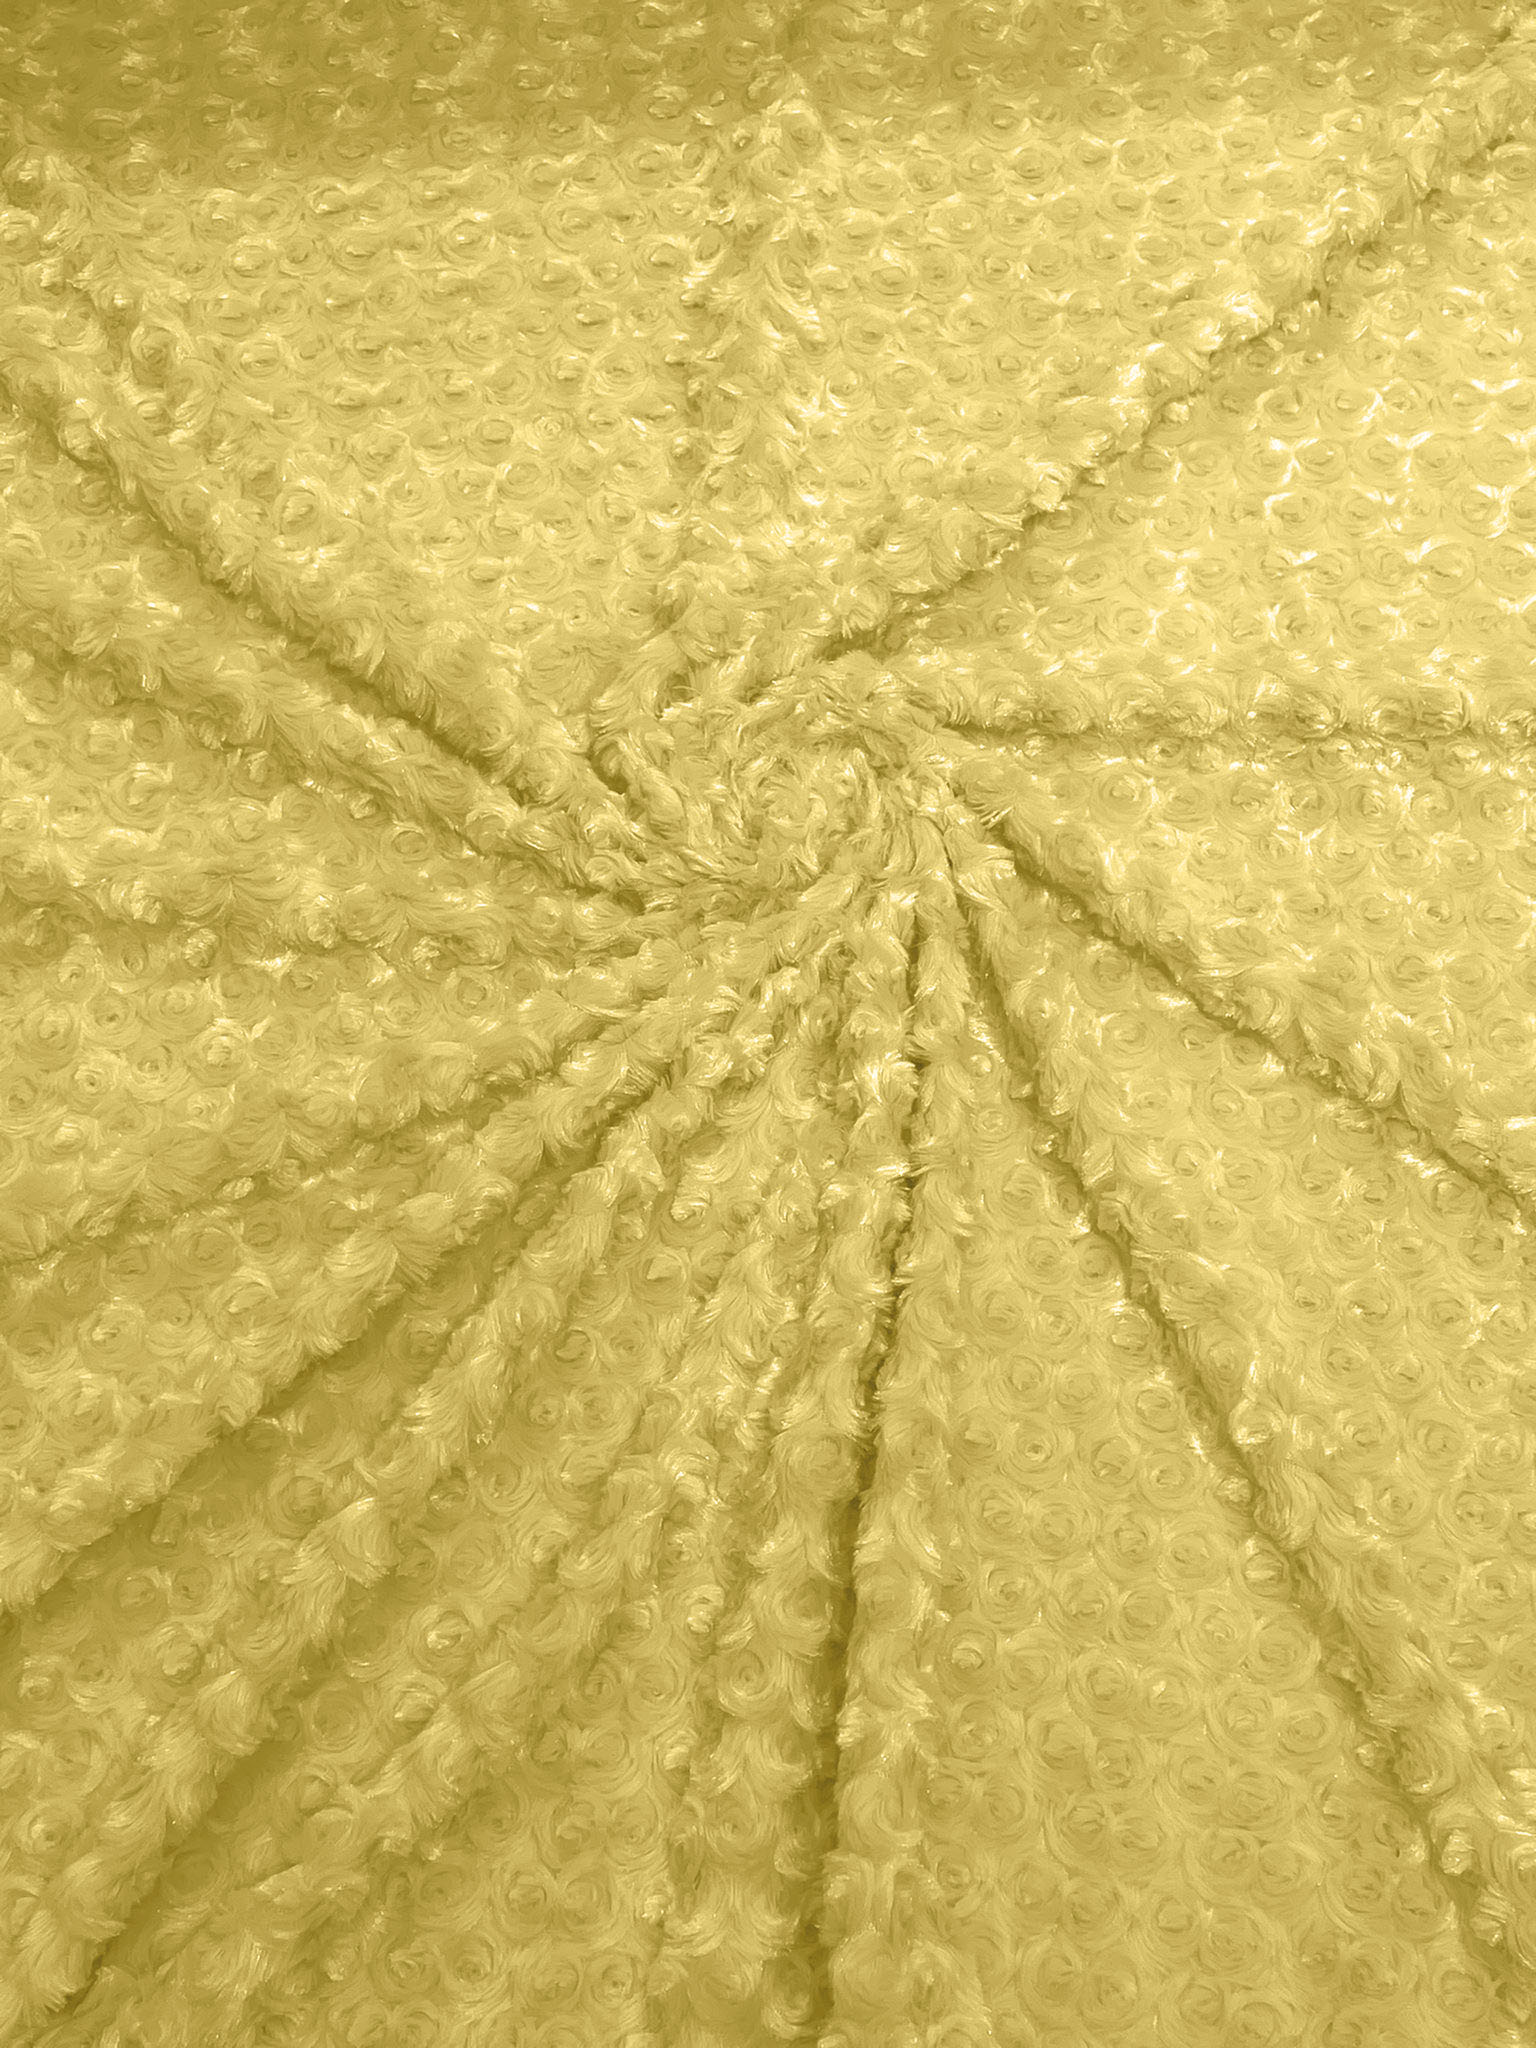 Light Yellow - Minky Swirl Rose Blossom Ball Rosebud Plush Fur Fabric Polyester- 58" Wide Sold By The Yard